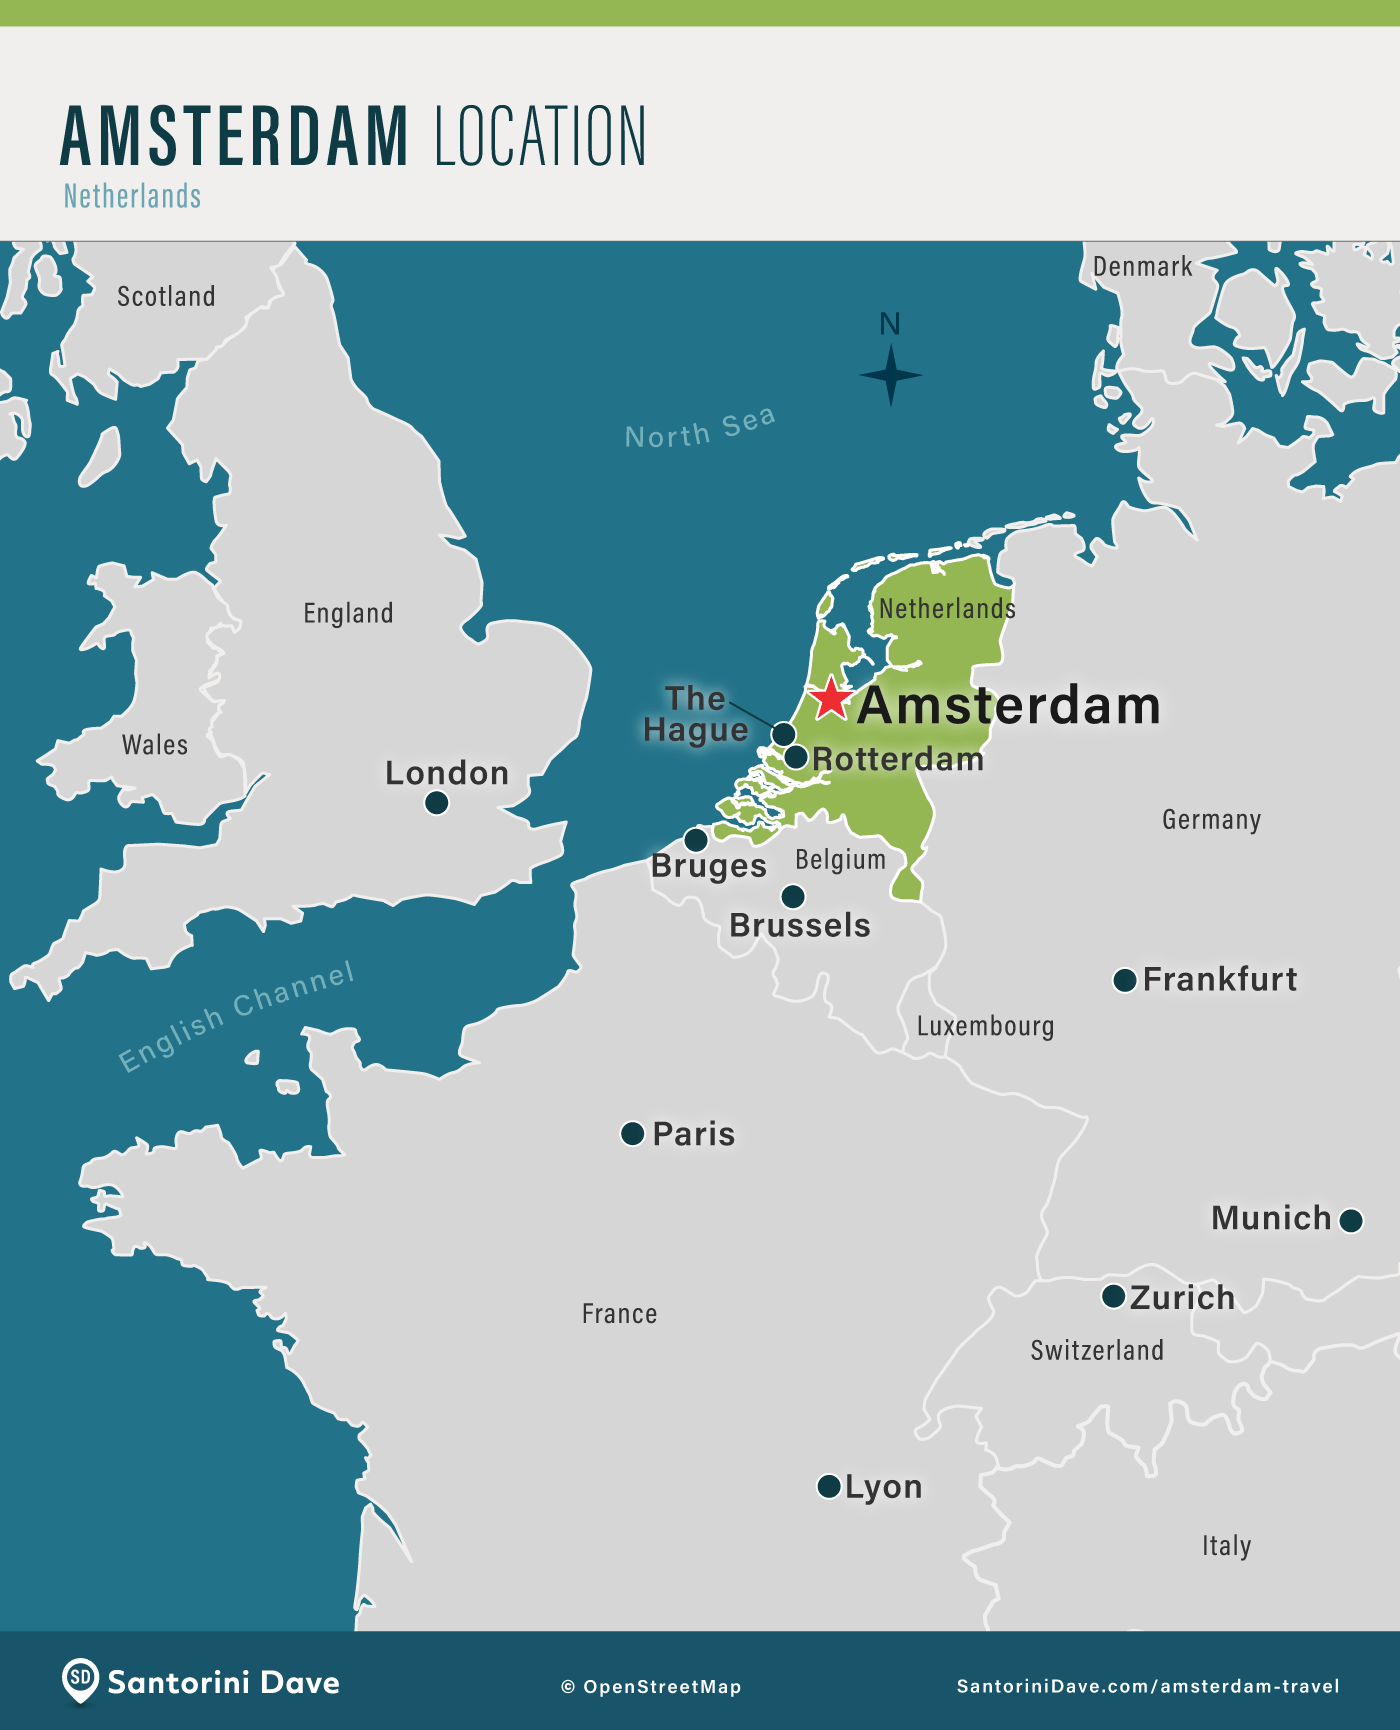 Map showing the location of Amsterdam, the Netherlands